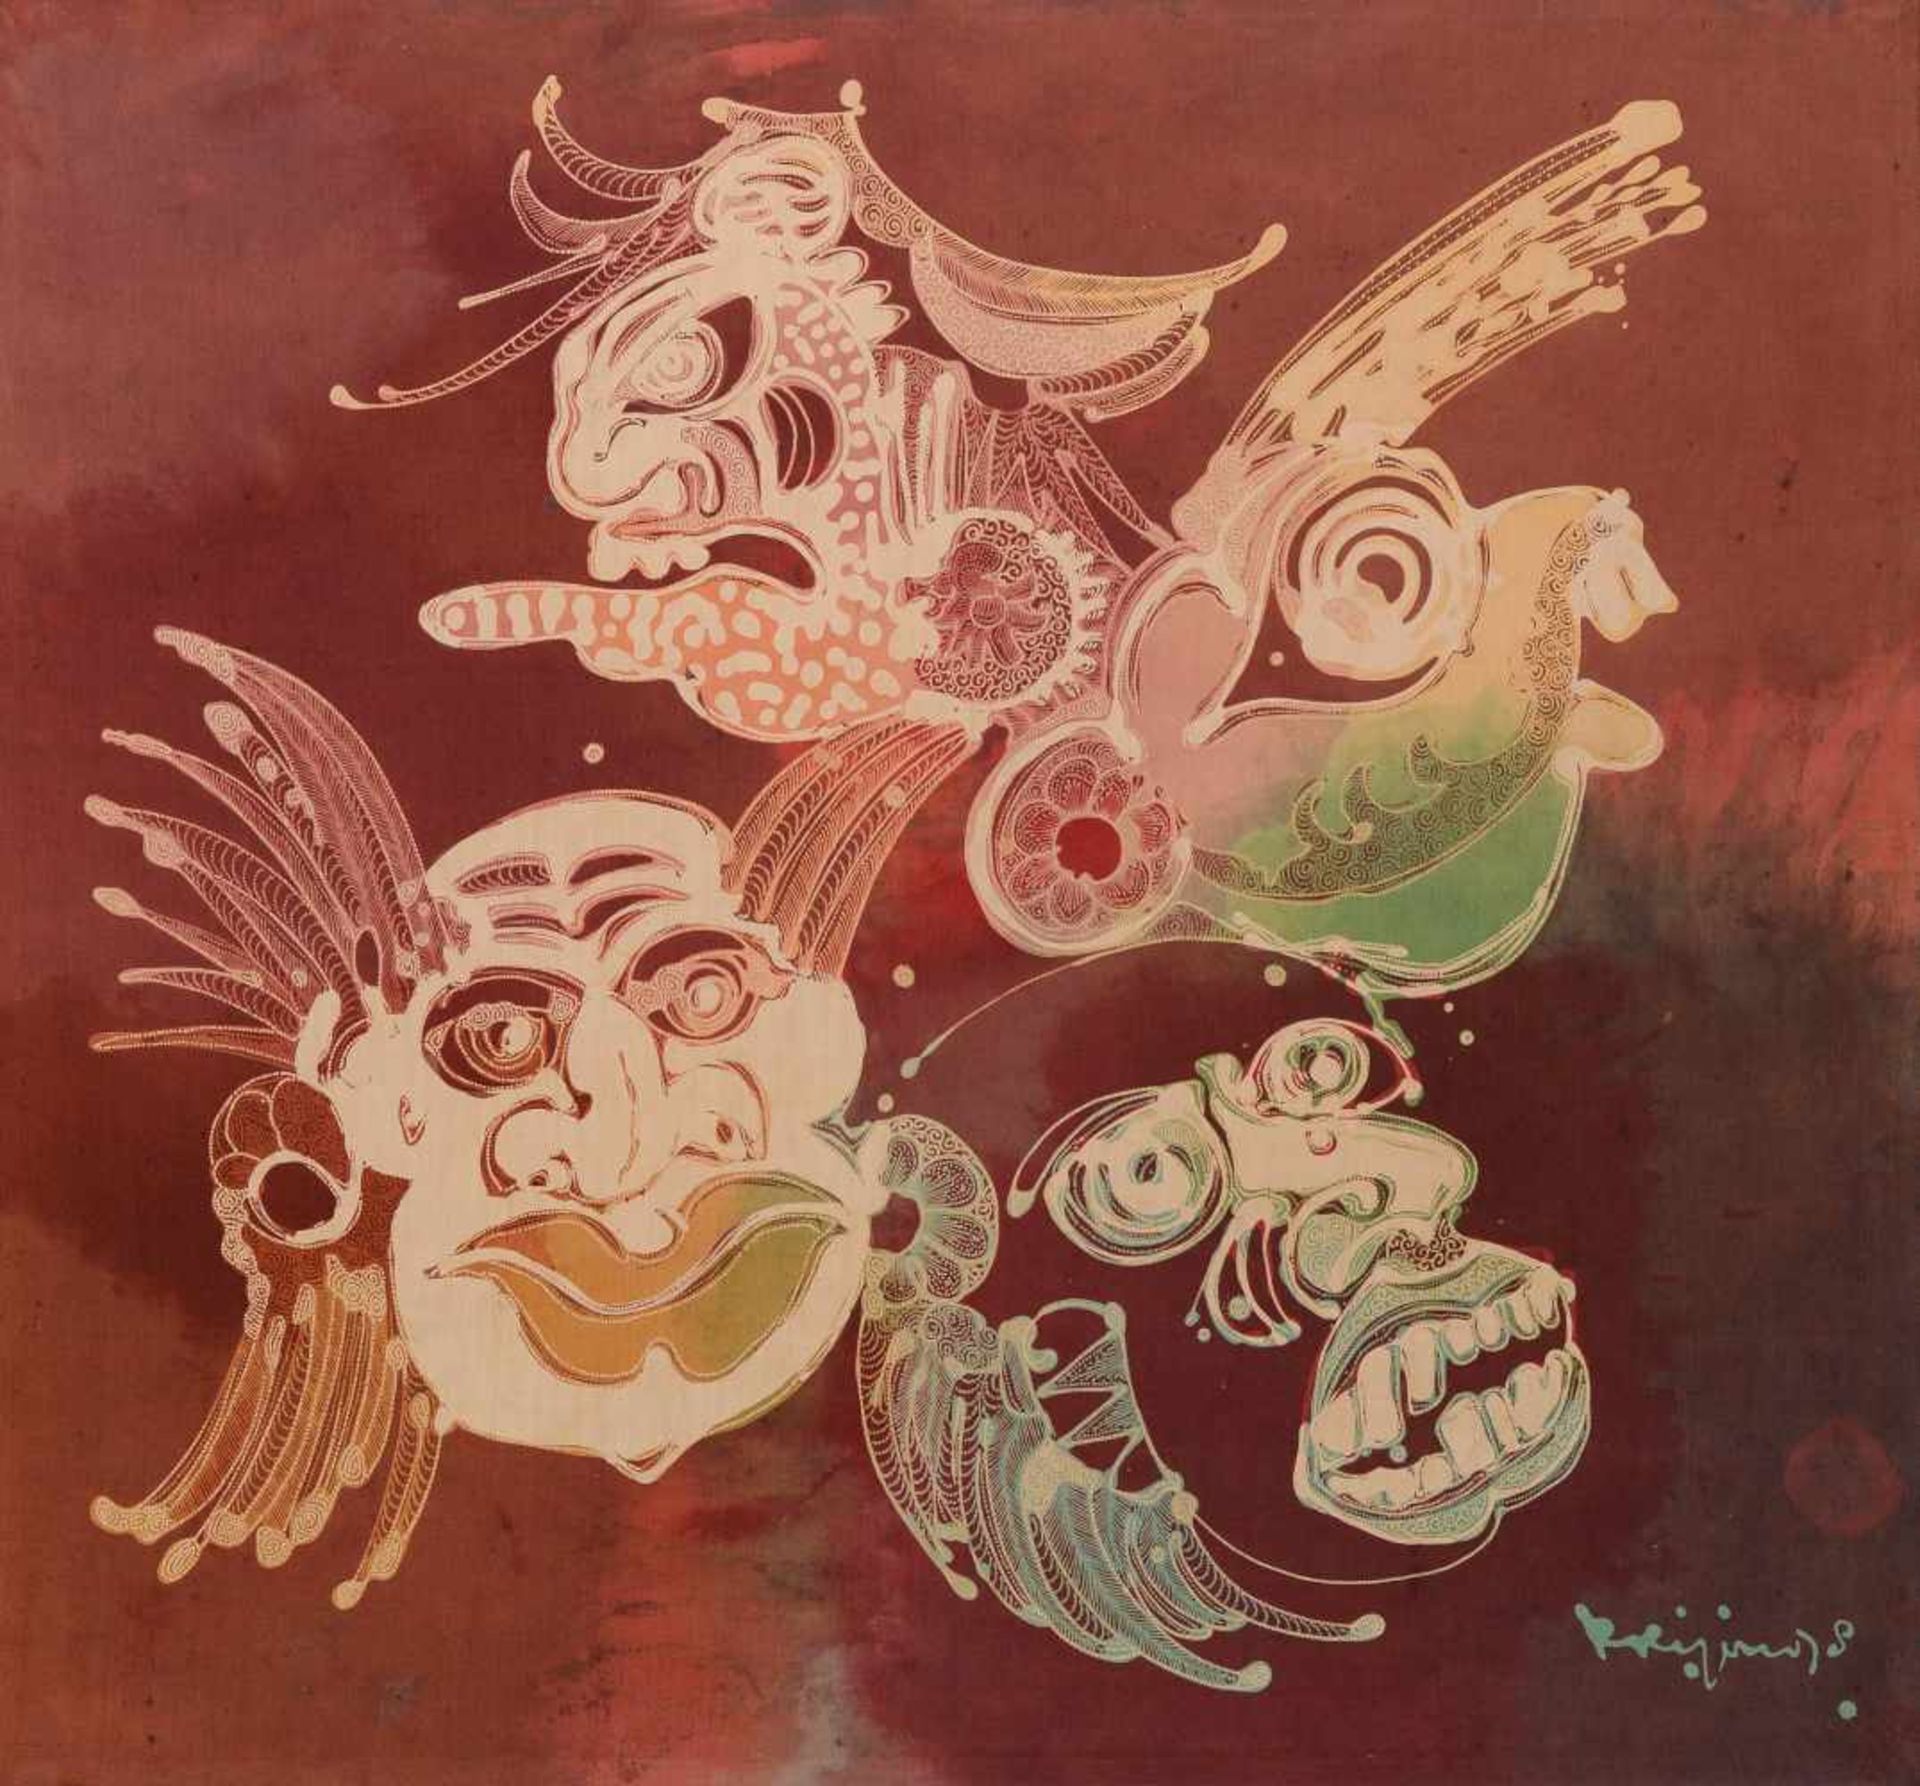 Krijono (1951-2011) 'Masks', signed and dated '79 lower right, batik on canvas. 79 x 85 cm.